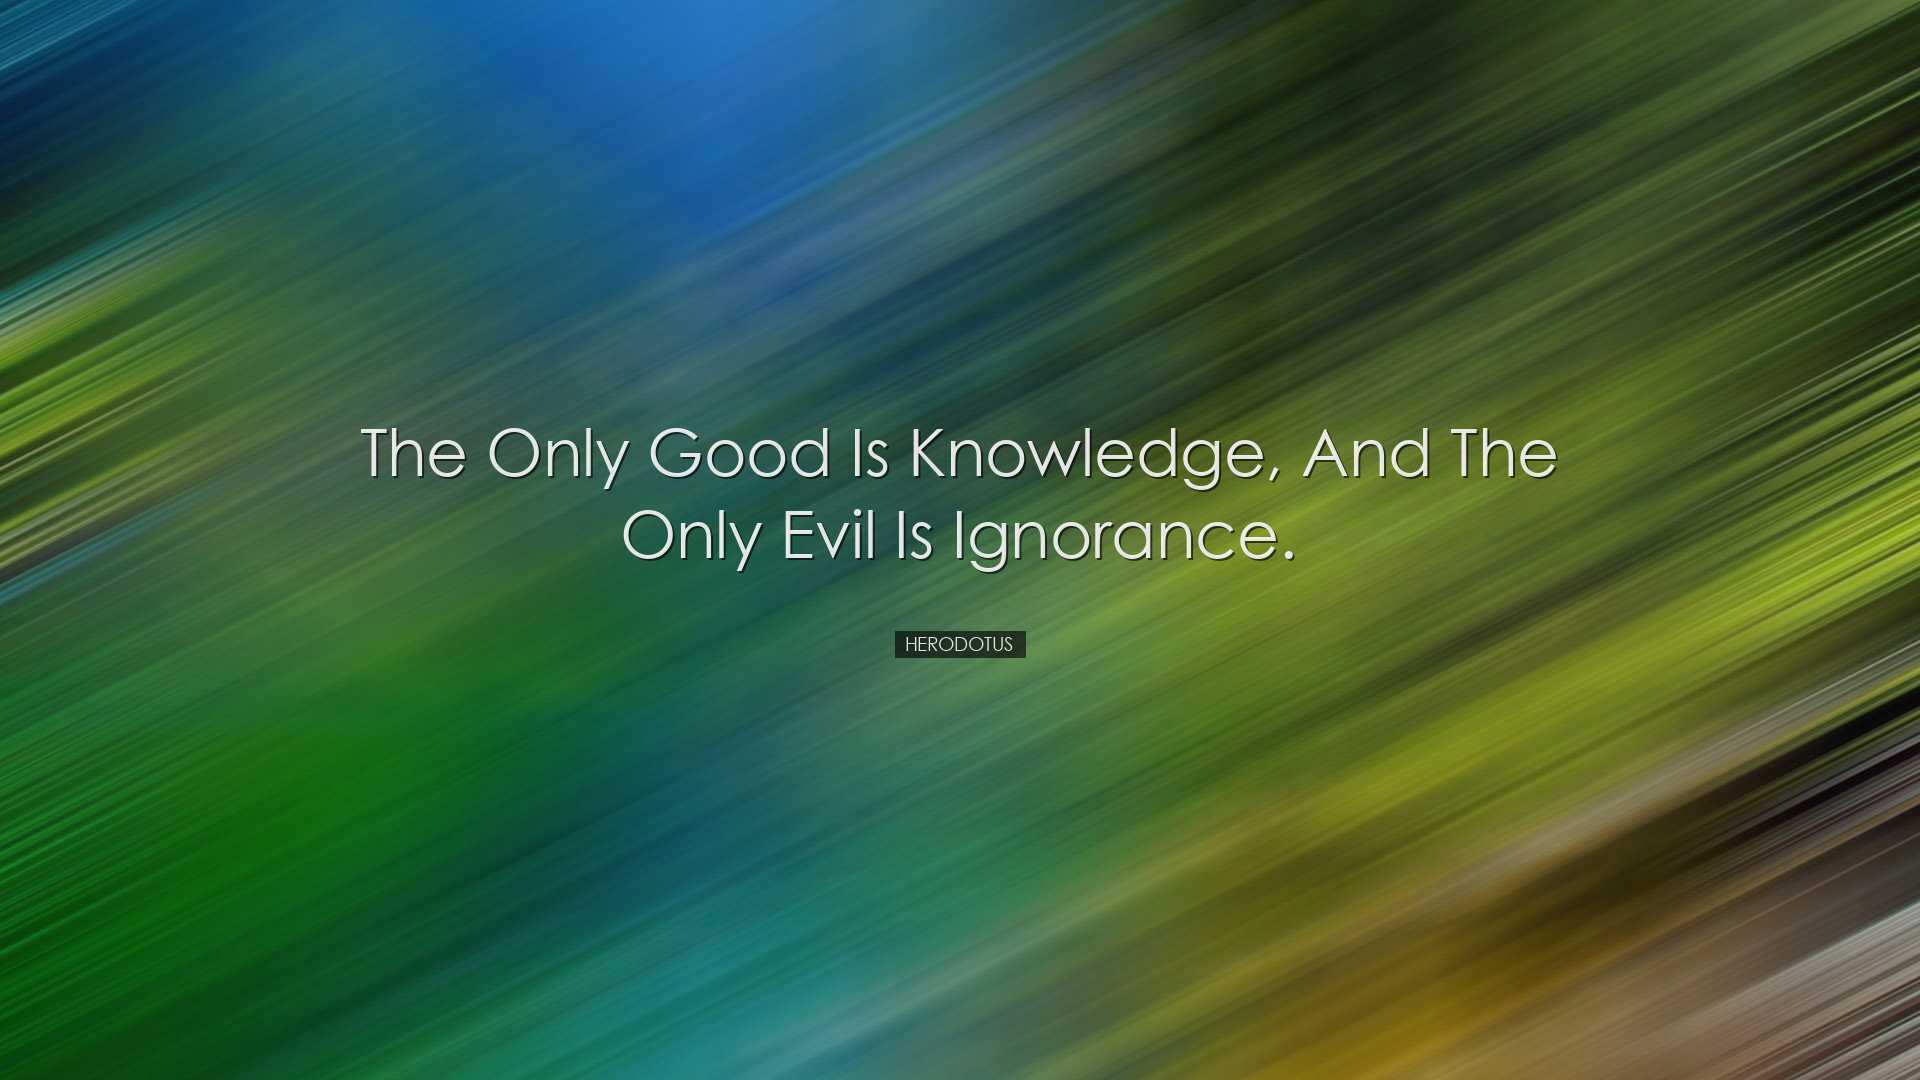 The only good is knowledge, and the only evil is ignorance. - Hero